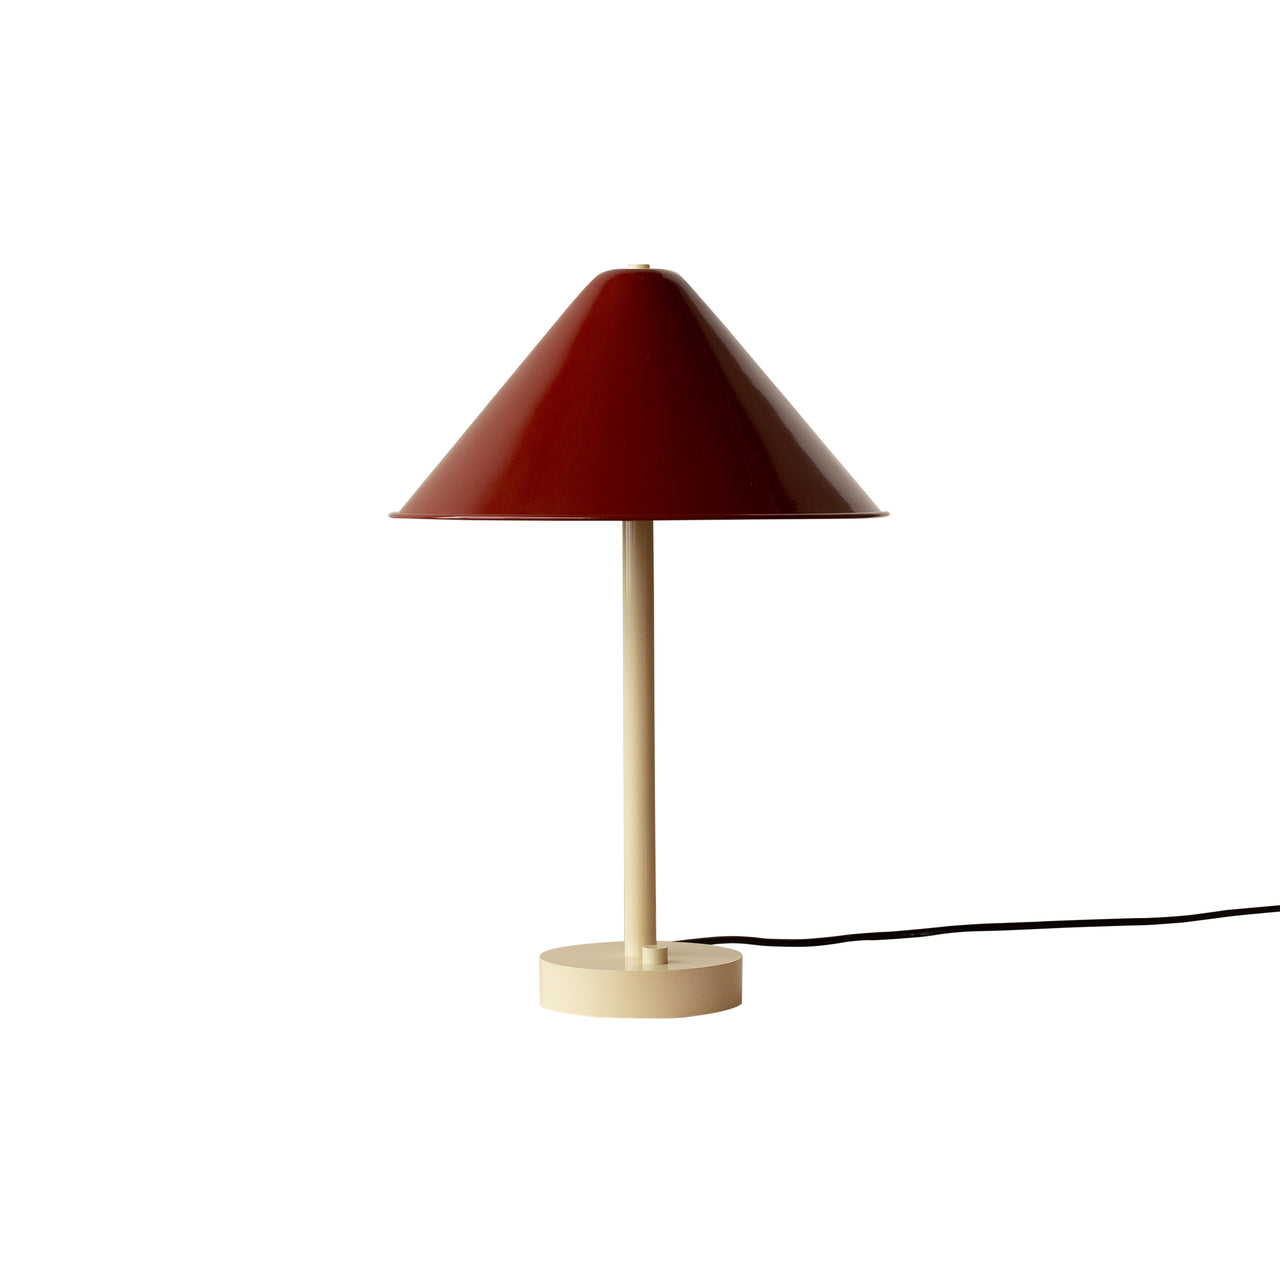 Eave Table Lamp: Oxide Red + Bone